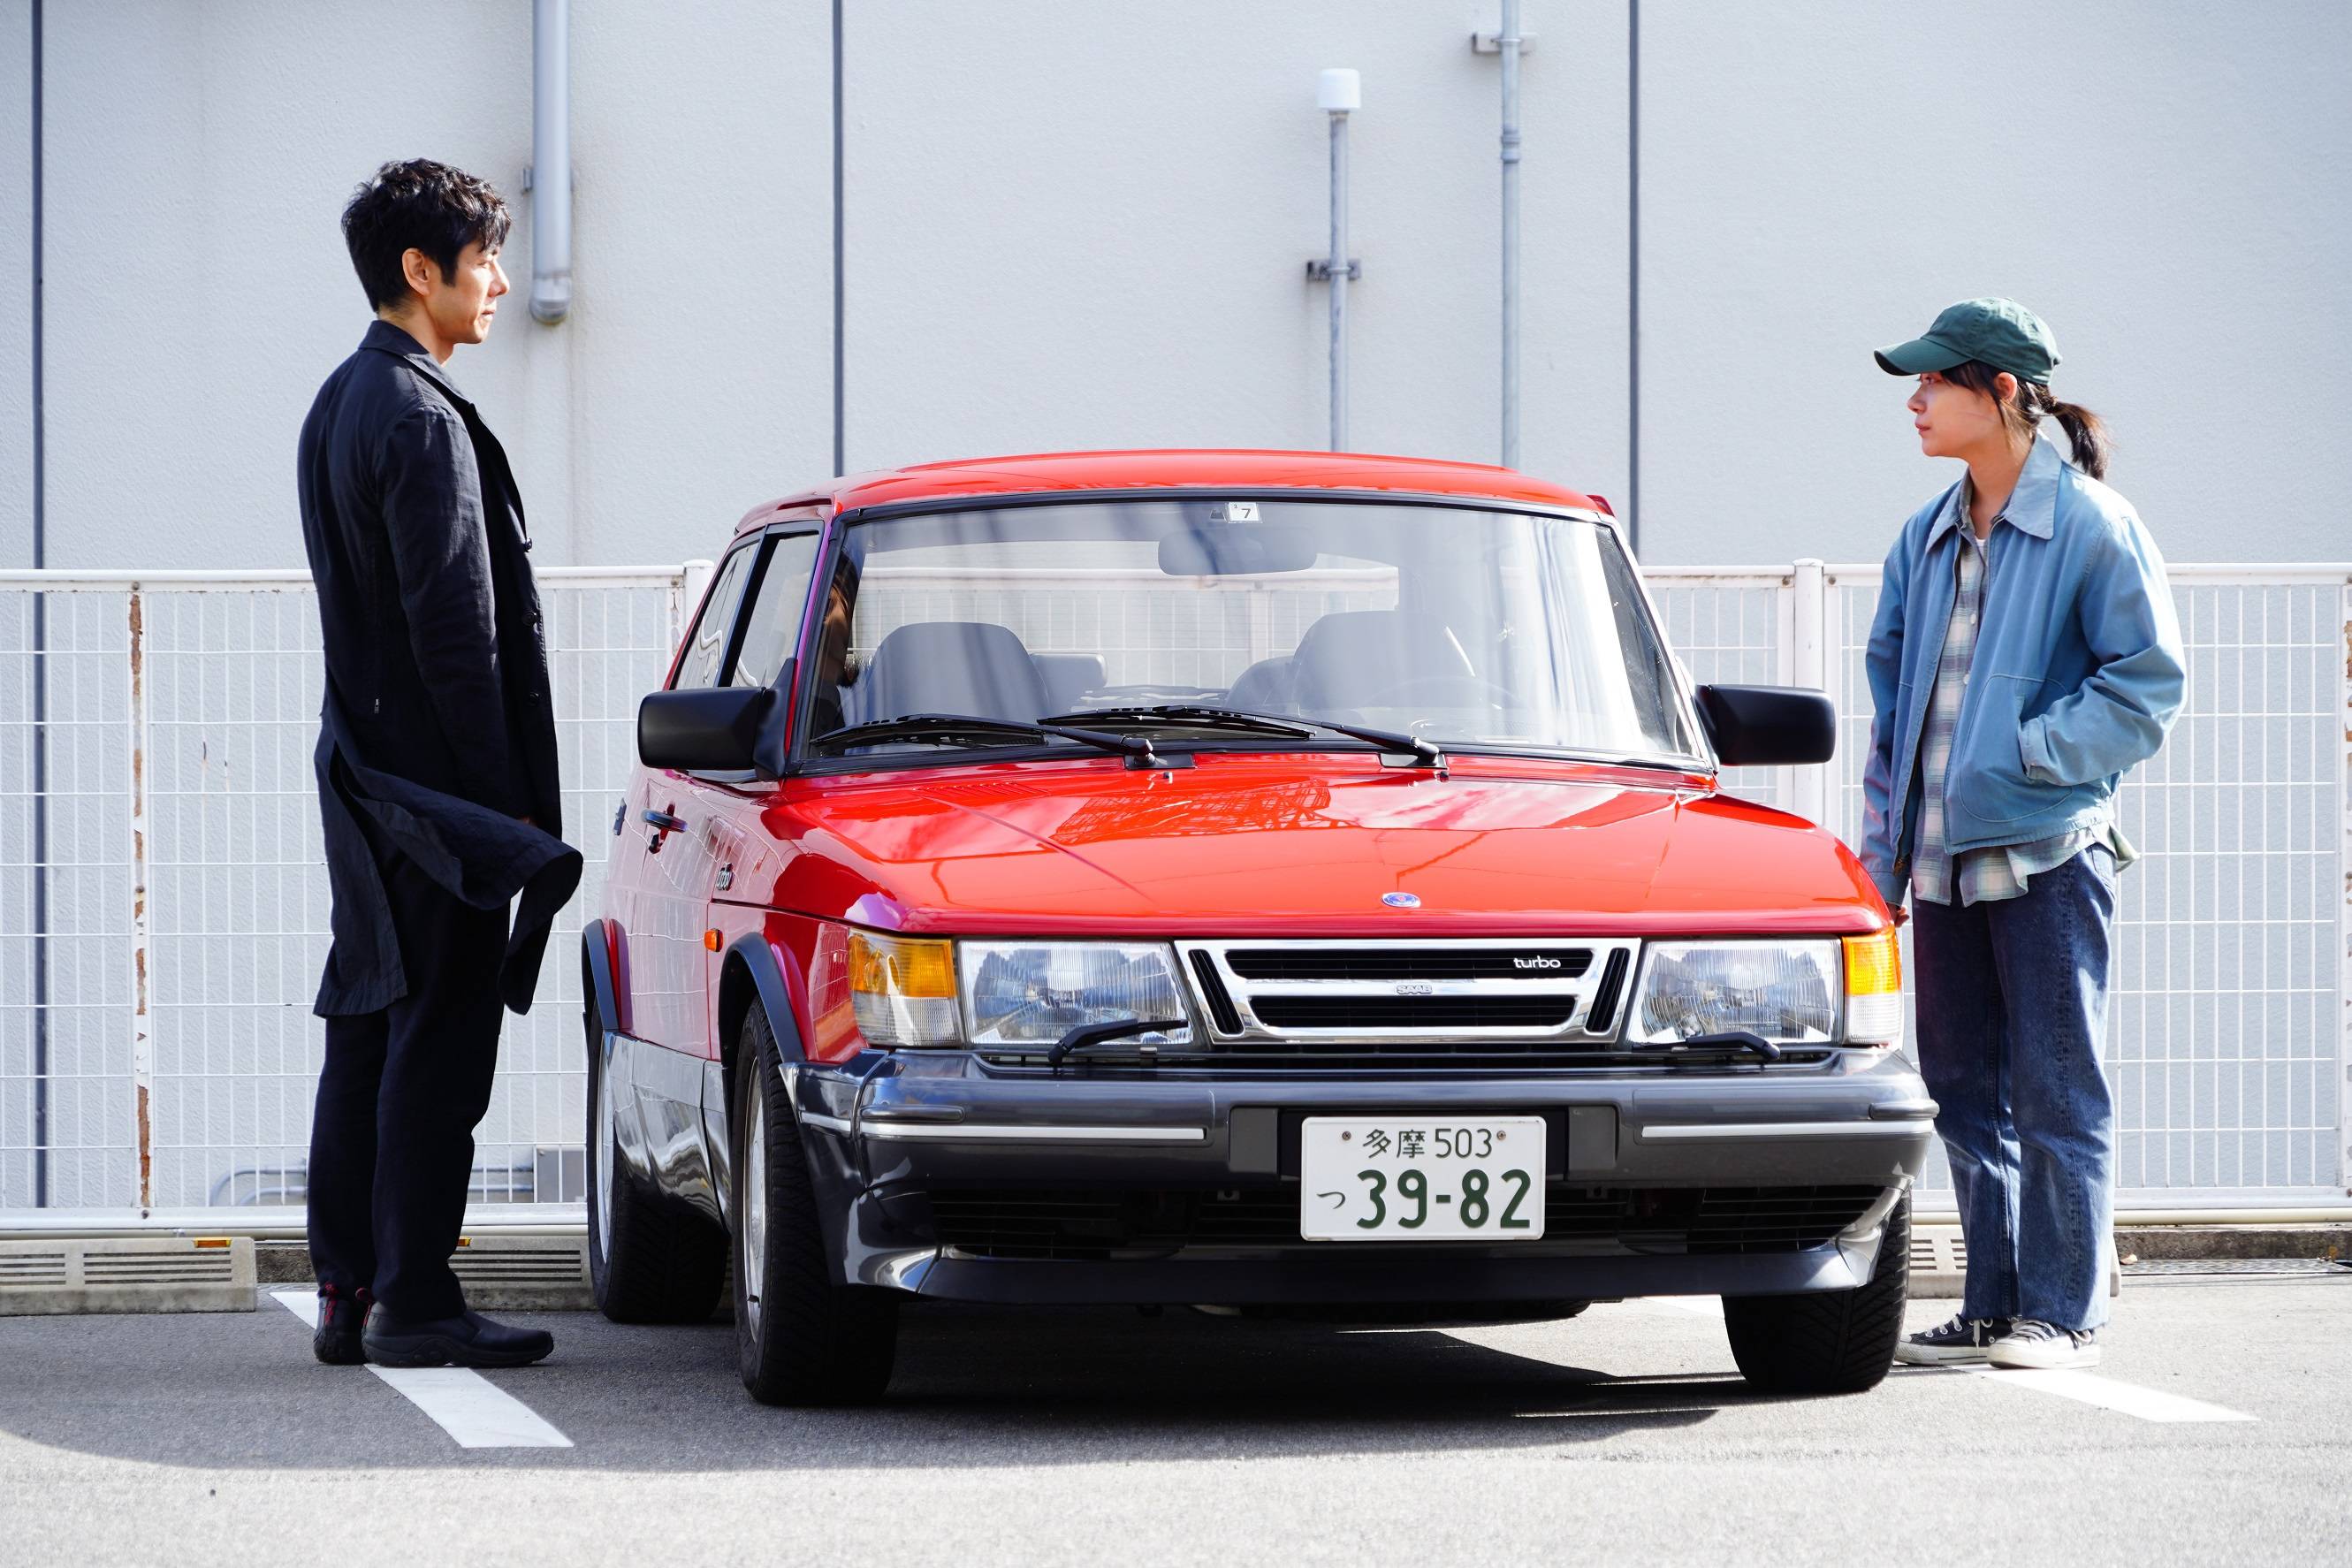 Ryusuke Hamaguchi’s “Drive My Car” is one of 15 films shortlisted for an Oscar in the best international feature category for this year’s Academy Awards. | © 2021 'DRIVE MY CAR' FILM PARTNERS